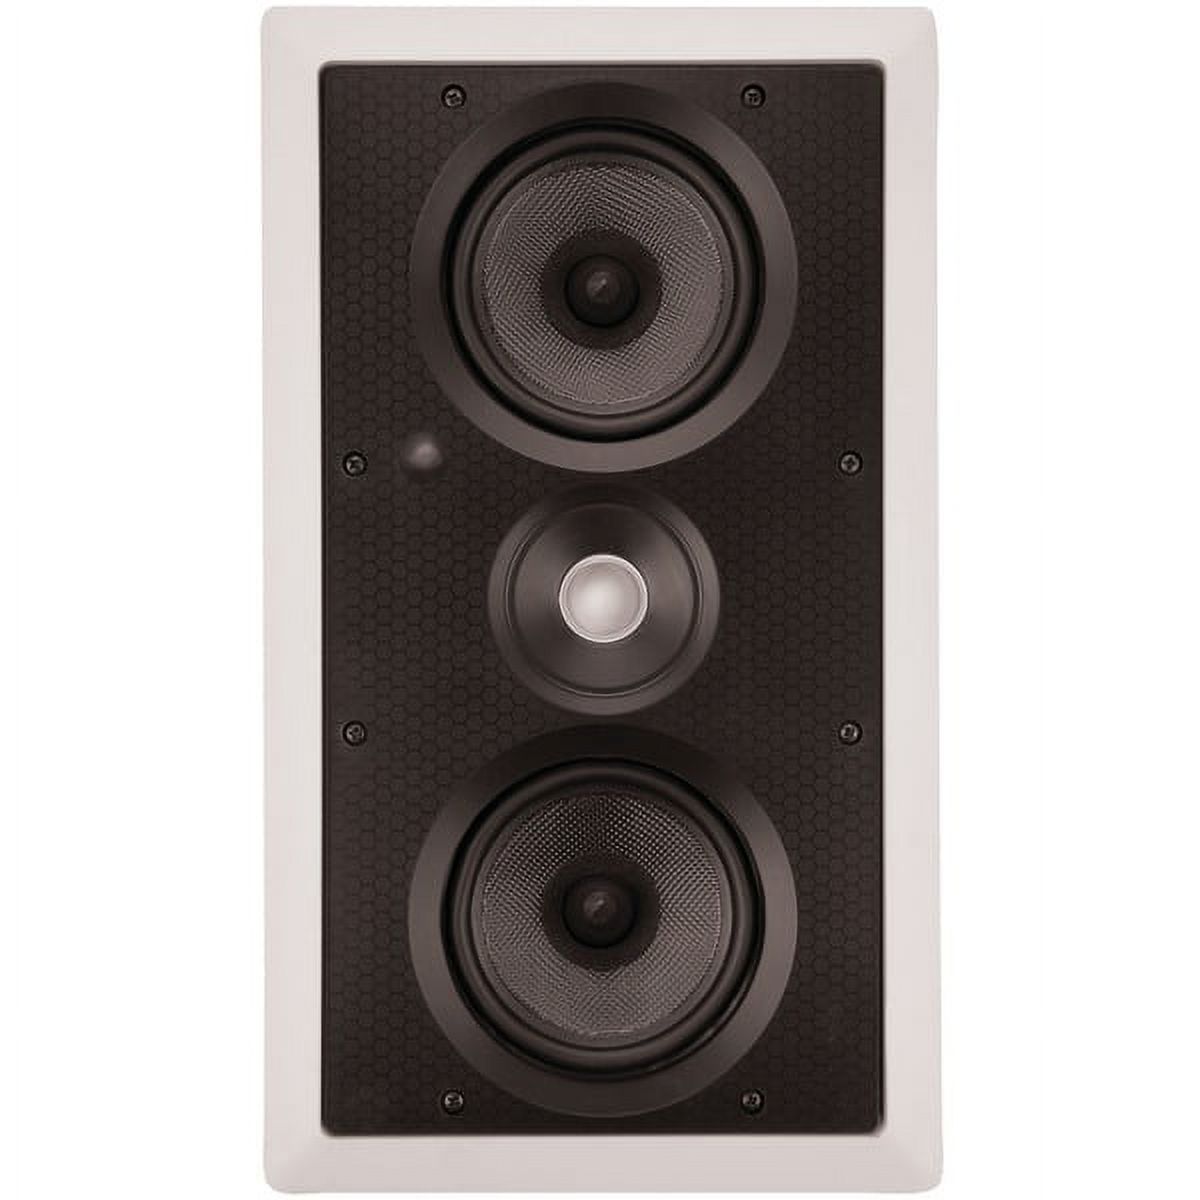 Architech® Dual 5.25" Lcr In-wall Speaker - image 1 of 3